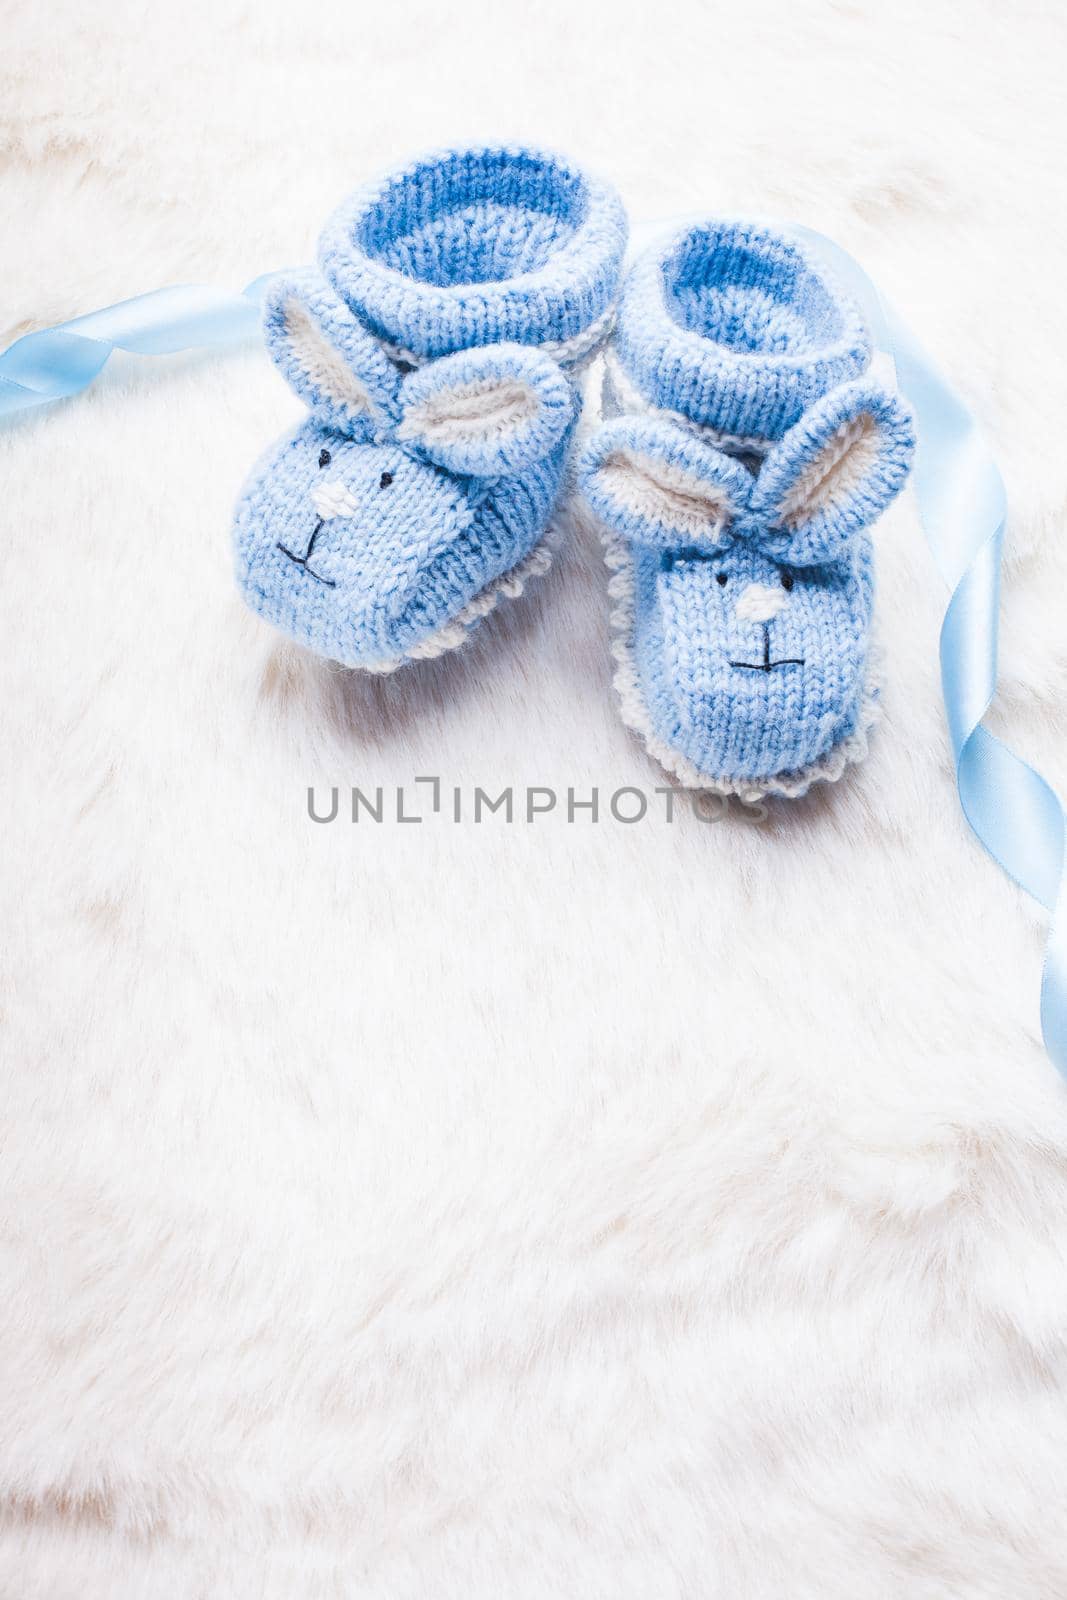 Knitted blue baby booties with rabbit muzzle for little boy